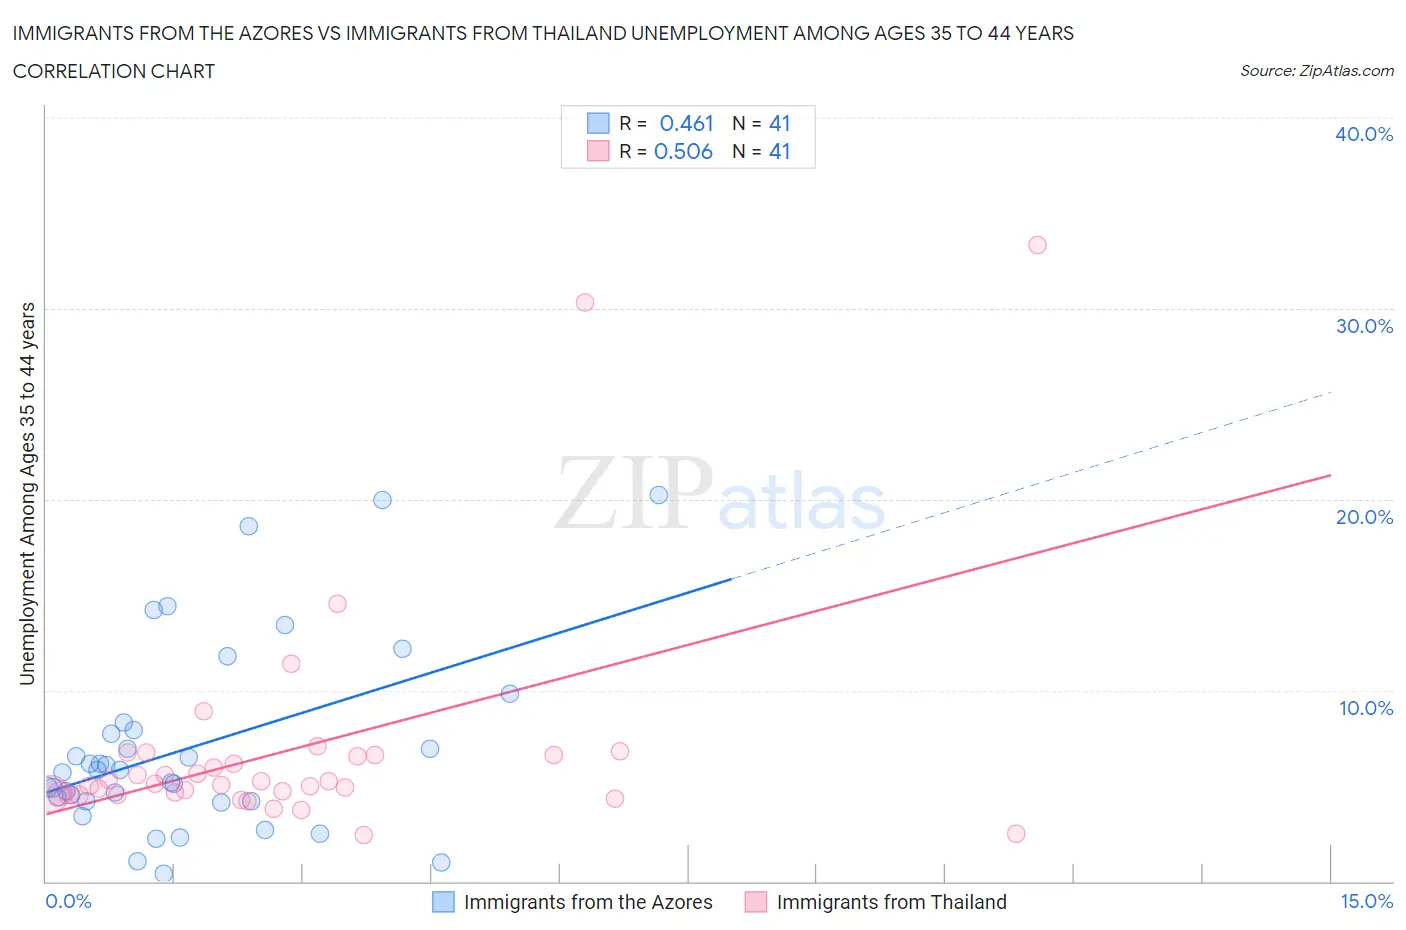 Immigrants from the Azores vs Immigrants from Thailand Unemployment Among Ages 35 to 44 years